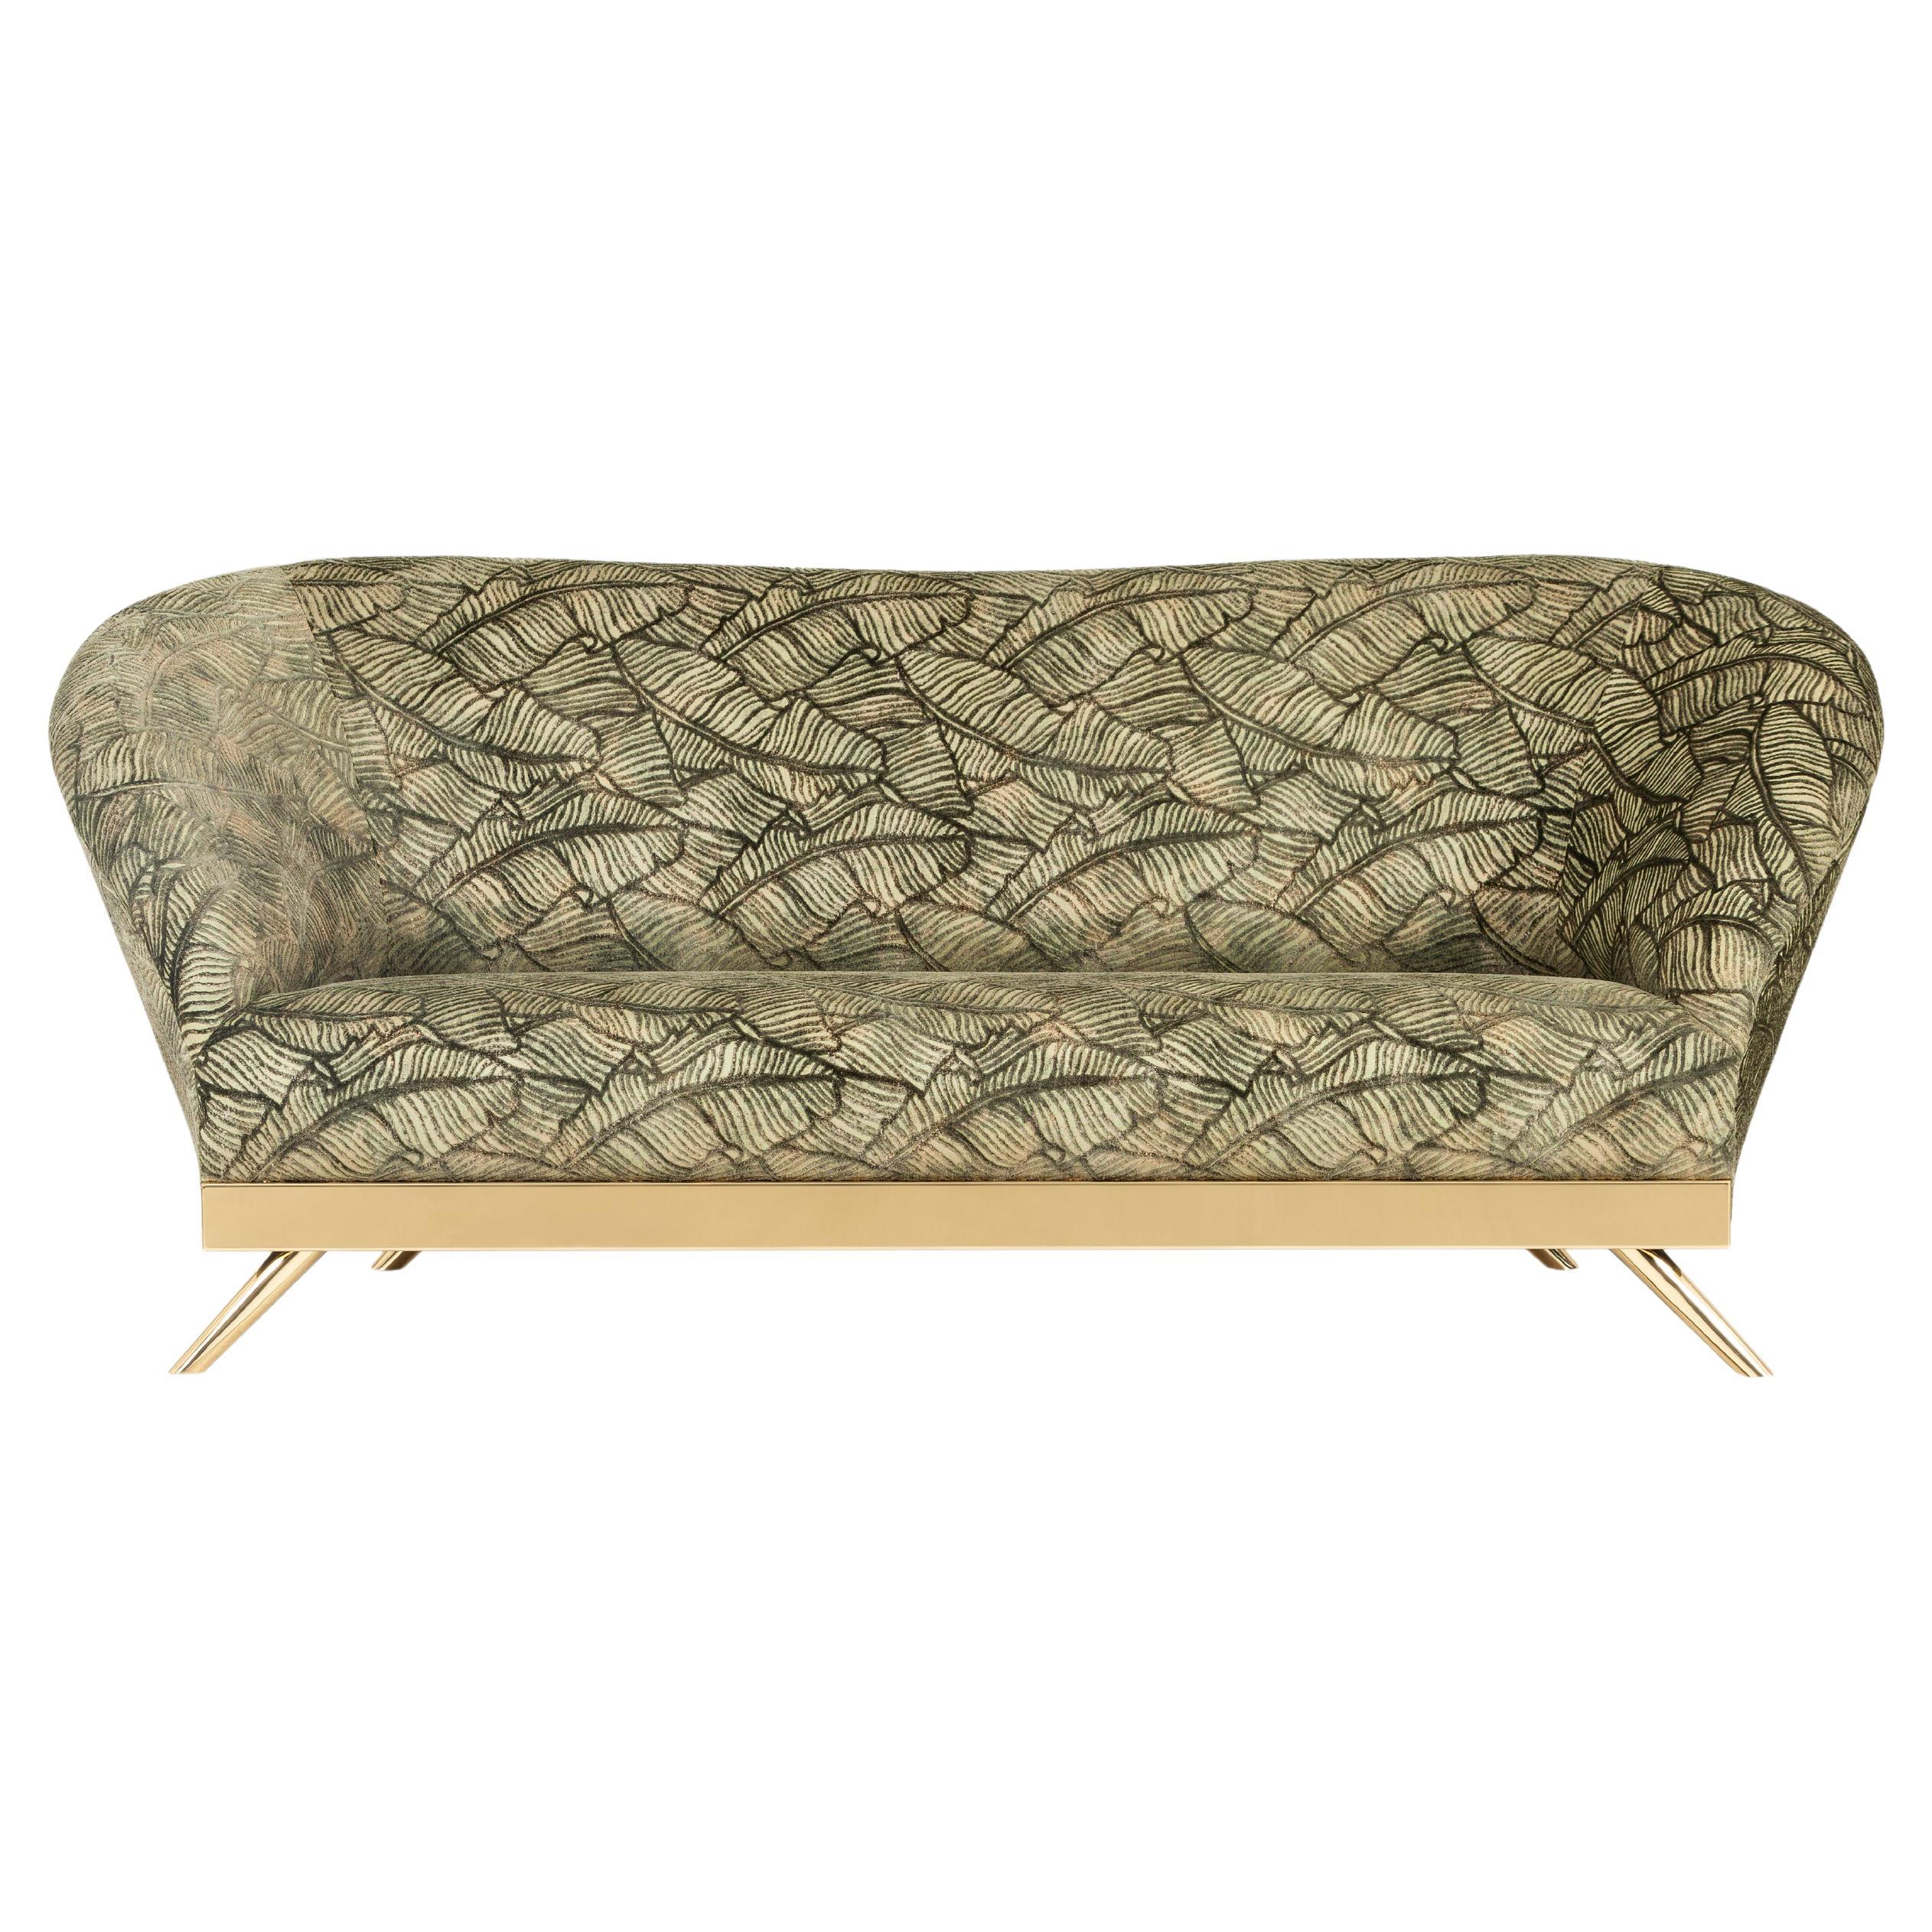 Cambridge 3-Seat Sofa in Green Jacquard Velvet Handcrafted by Greenapple